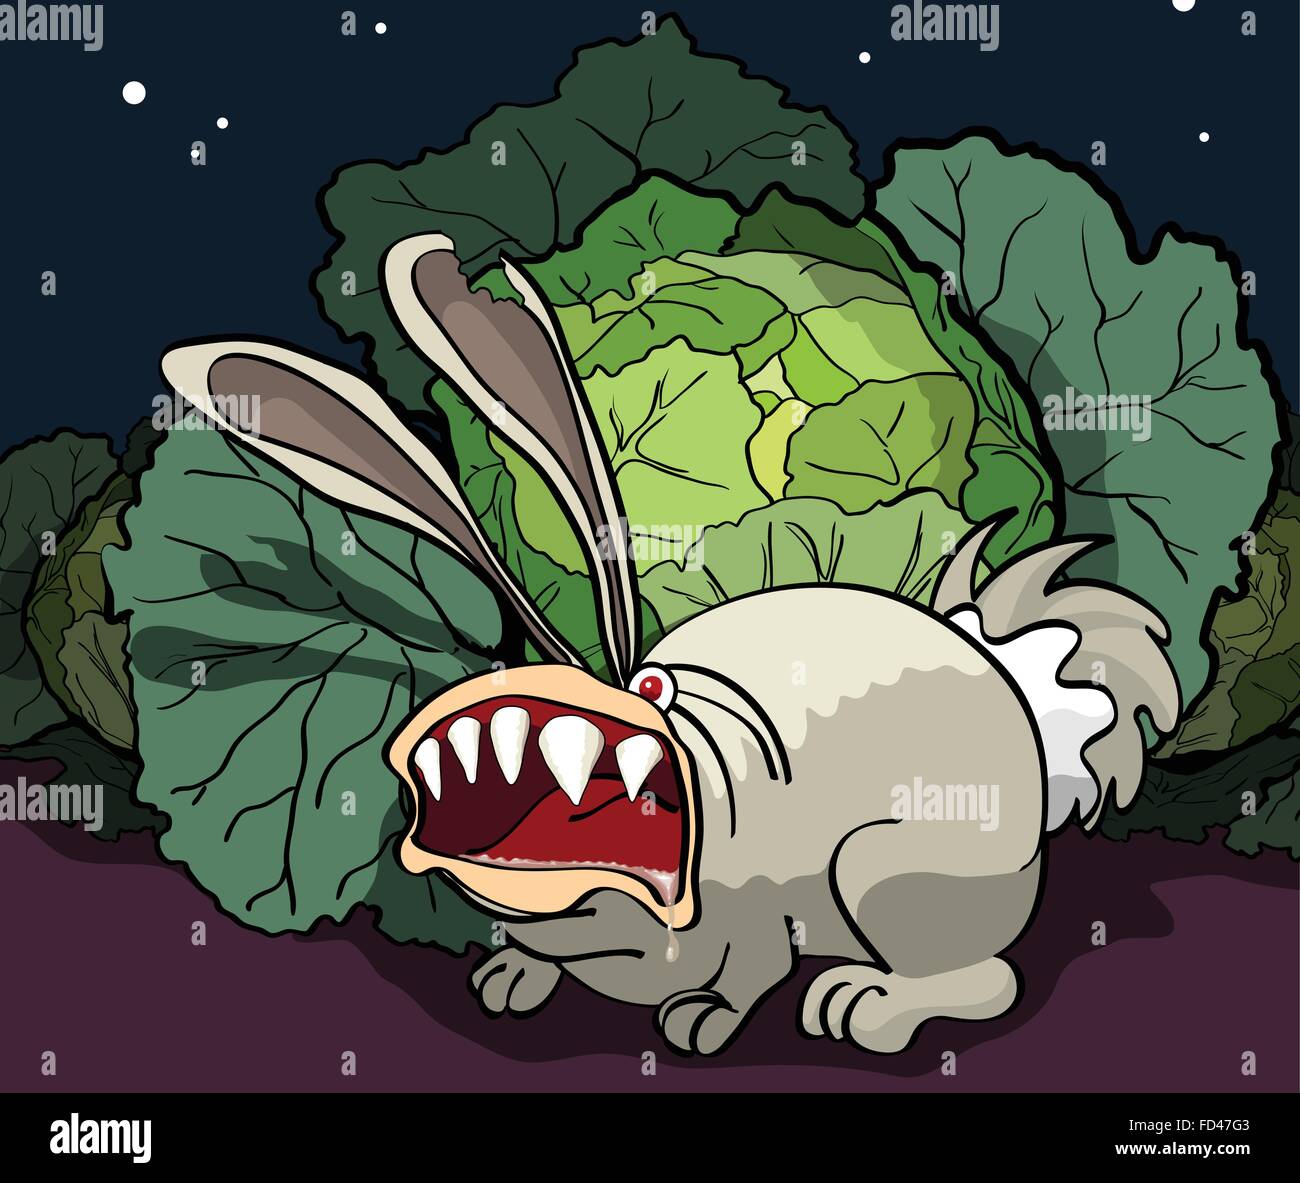 The enraged rabbit guards cabbage Stock Vector